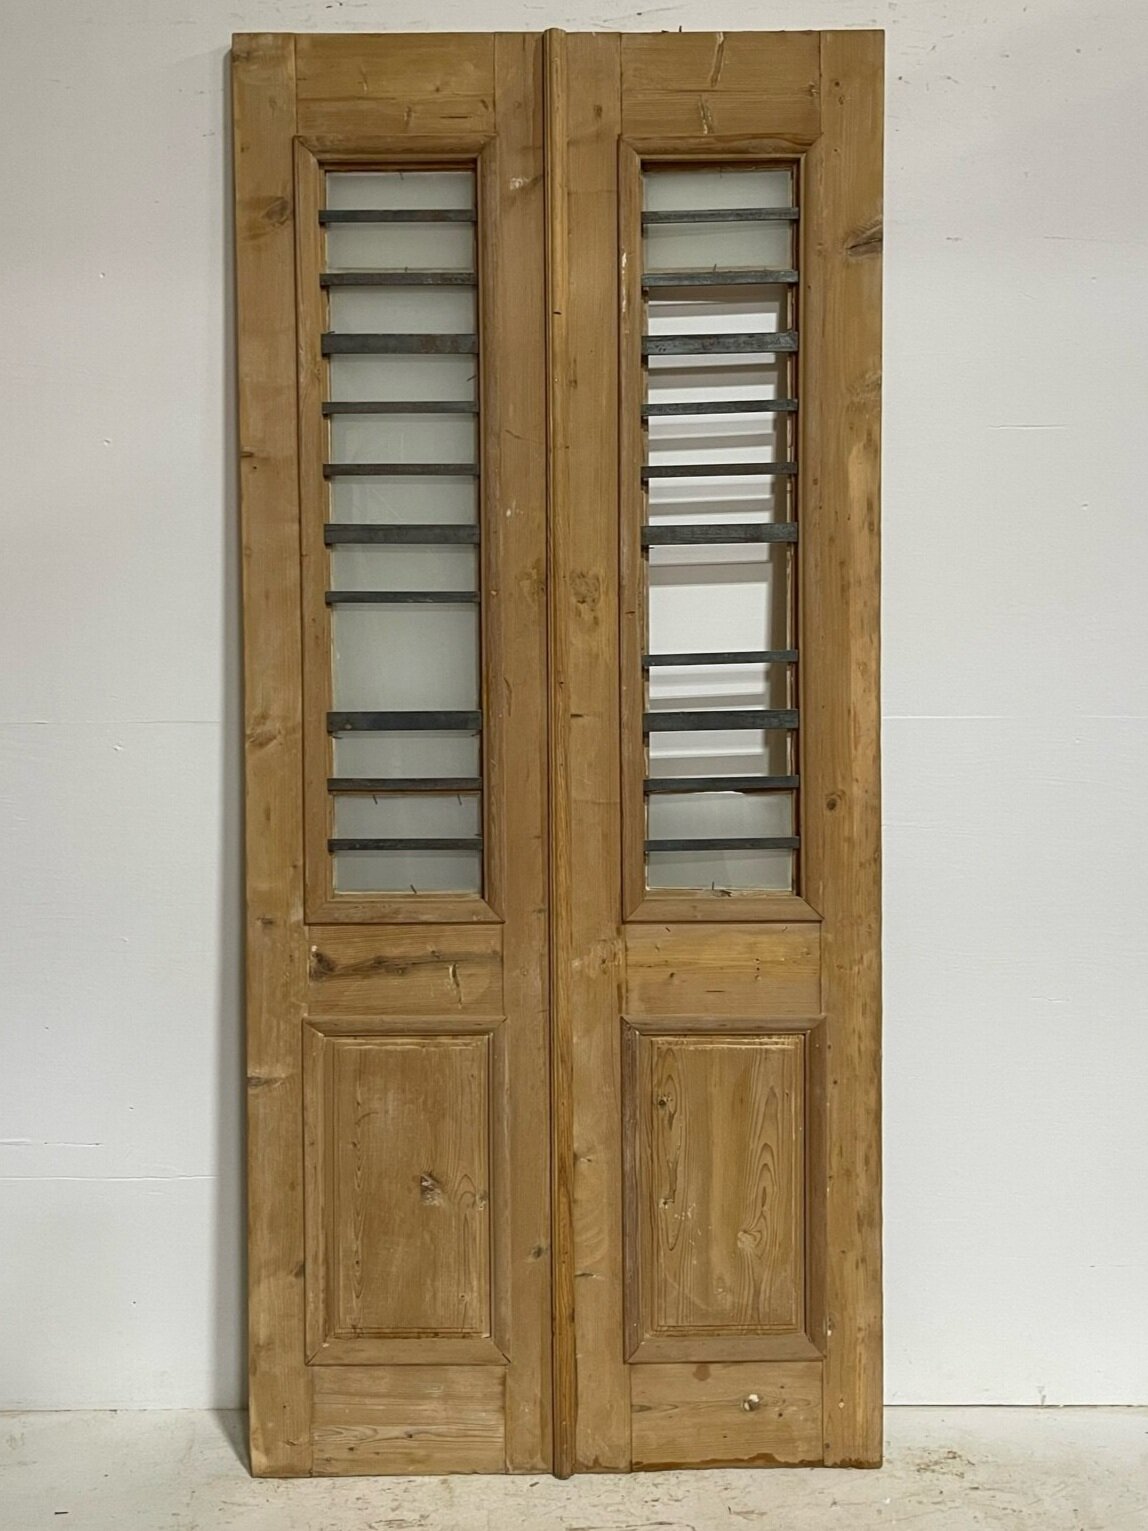 Antique French doors (91.5X40.75) with glass G1580